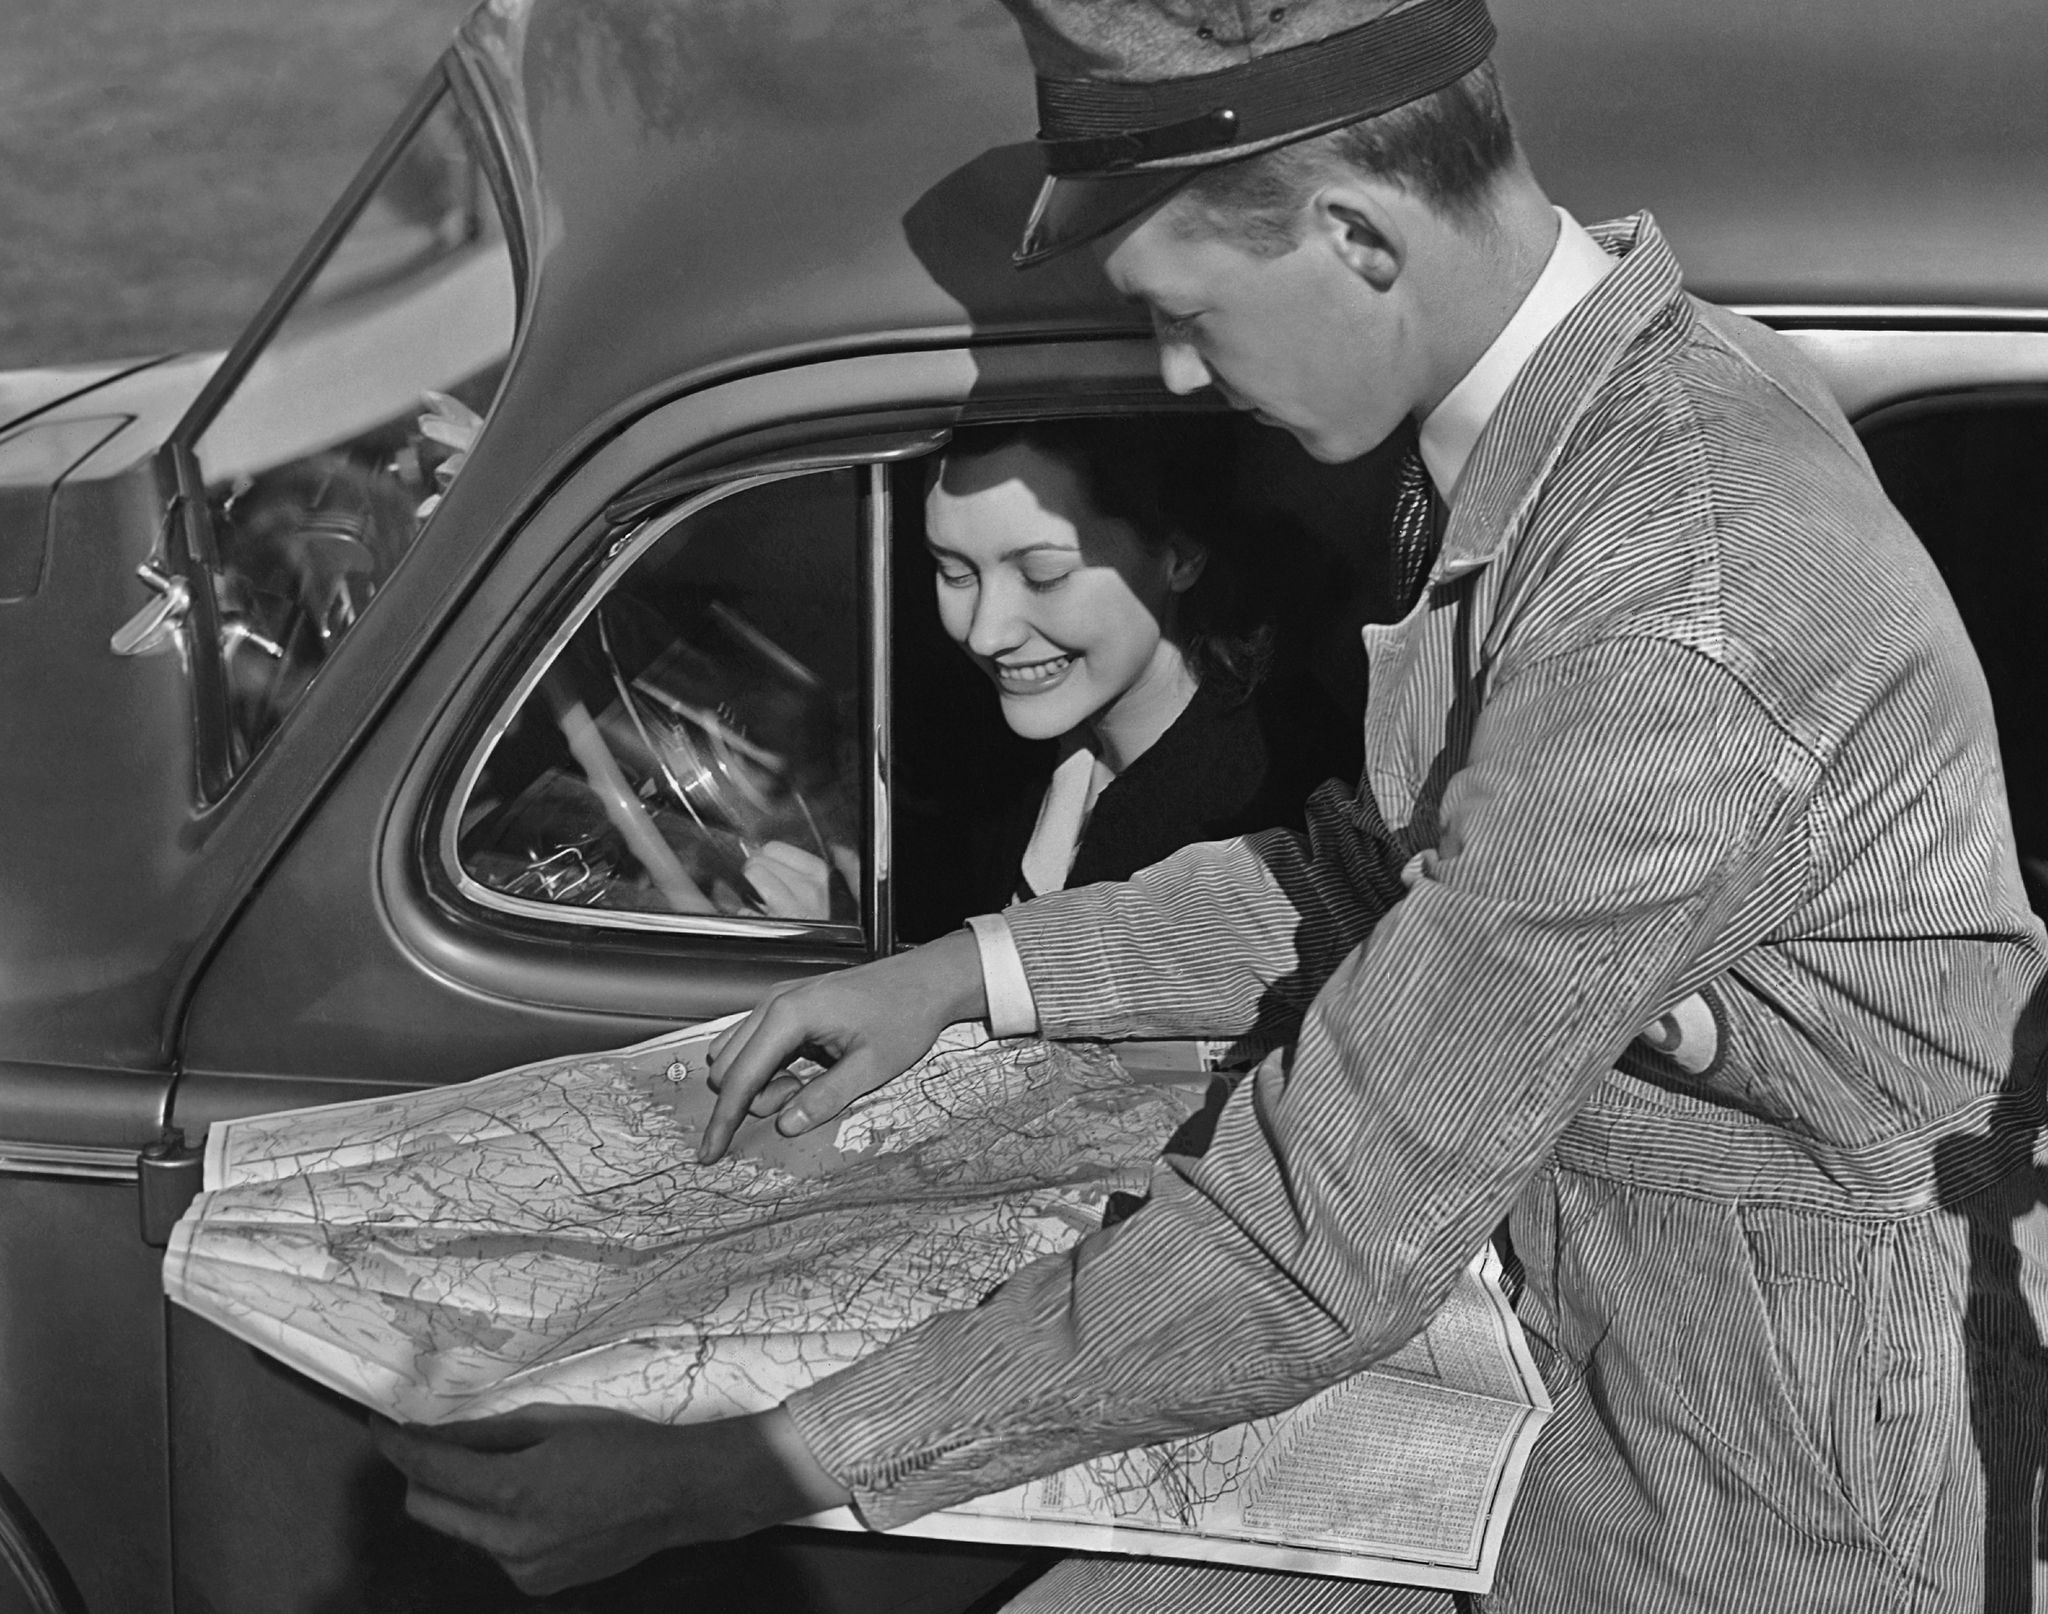 a gas station attendant showing a location on a map to a woman driver circa 1950 photo by keystone viewfpggetty images